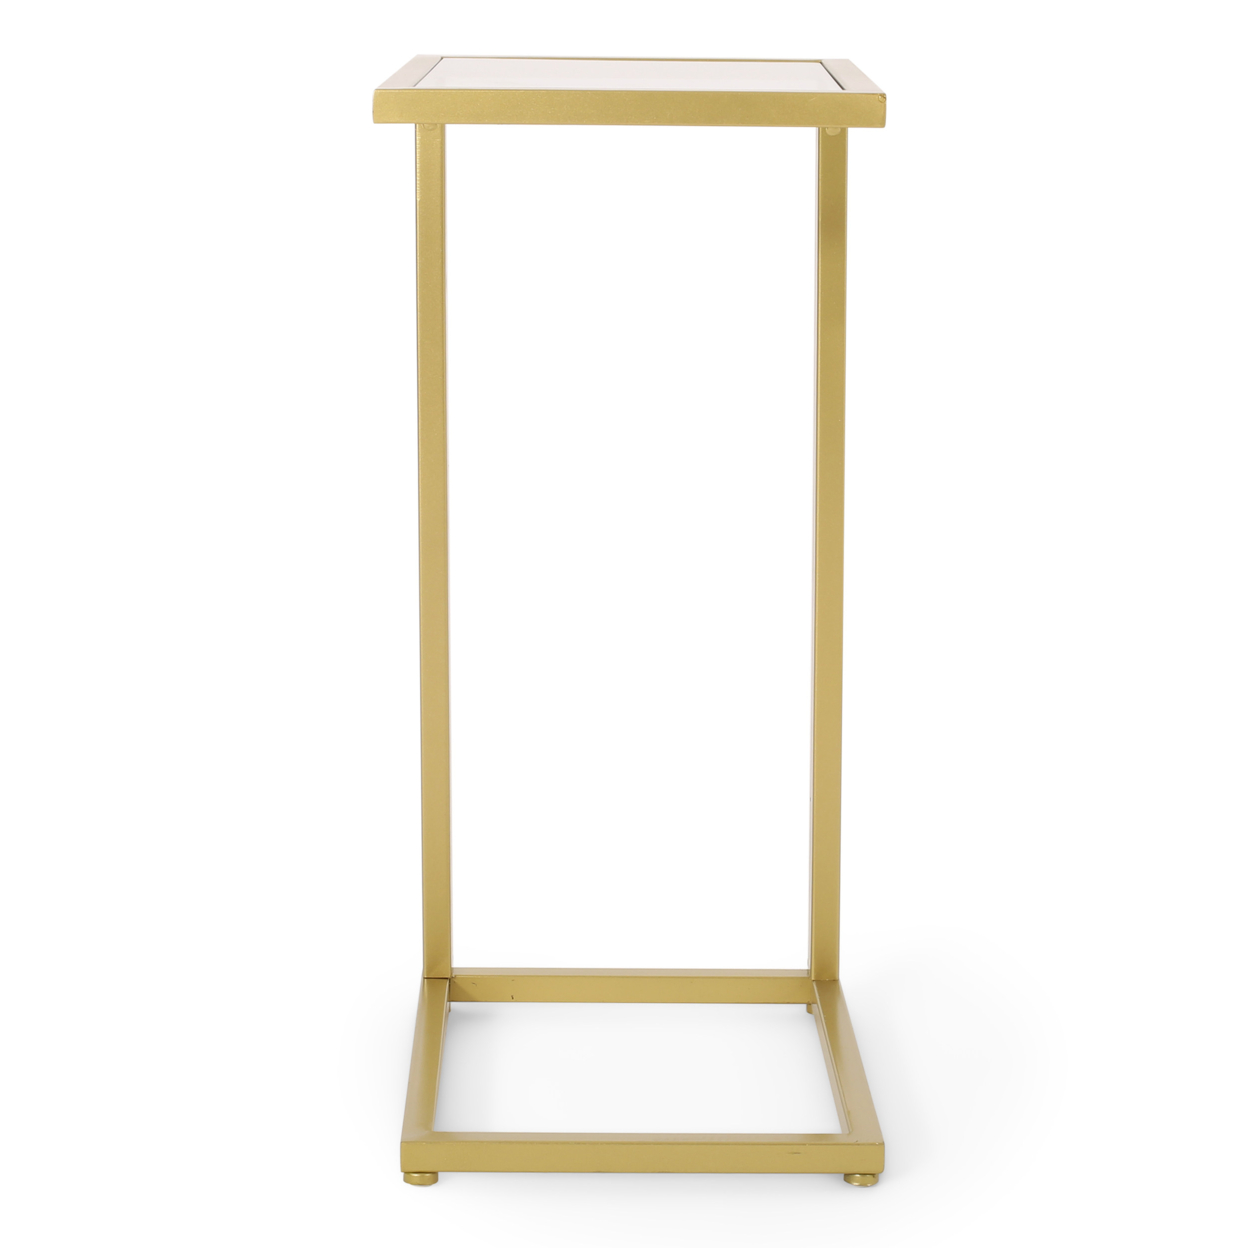 Hebble Modern Glam Glass Top C-Shaped Side Table, Gold